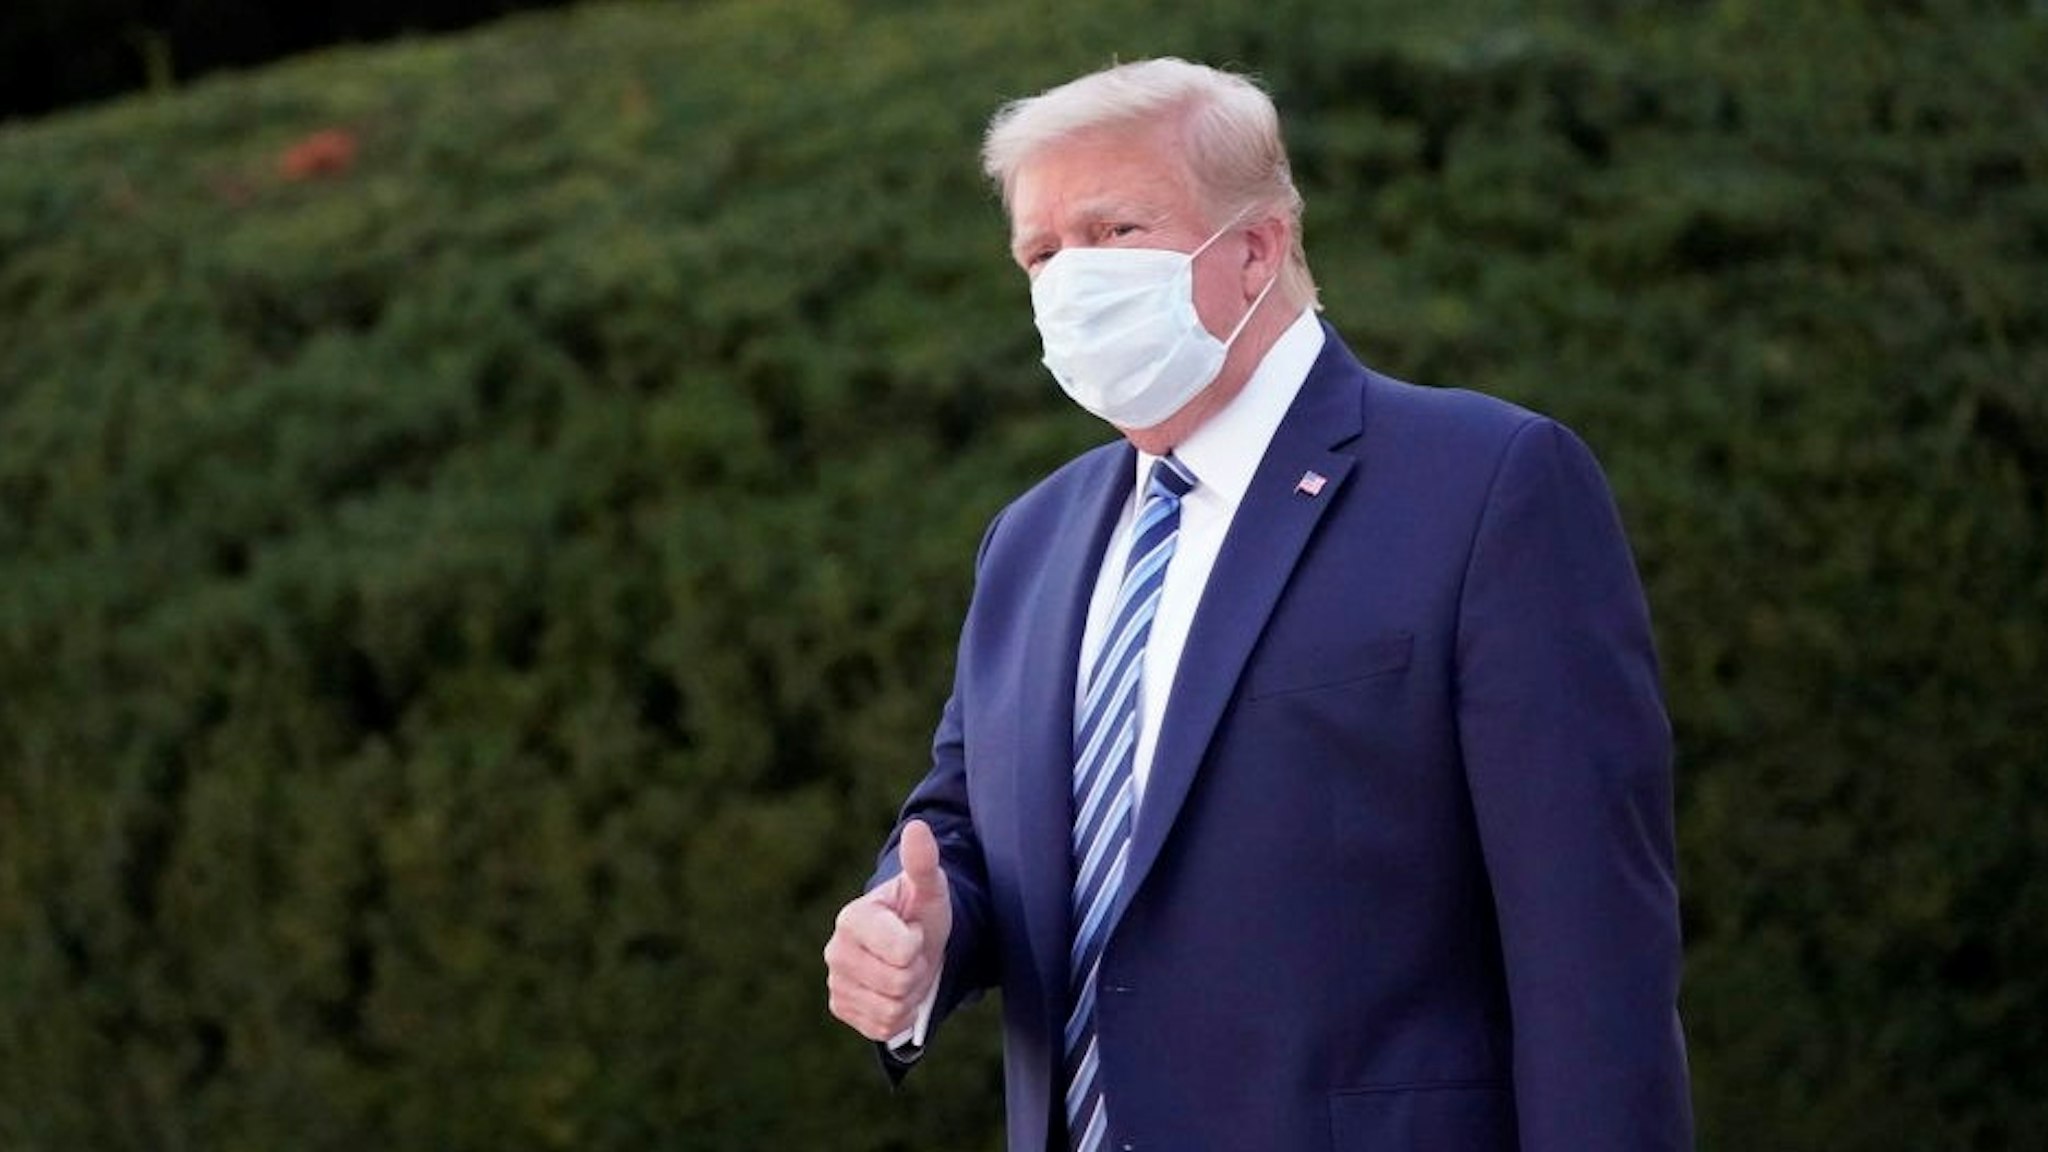 U.S. President Donald Trump gestures outside of Walter Reed National Military Medical Center in Bethesda, Maryland, U.S., on Monday, Oct. 5, 2020. Trump's aides will try to keep him confined to the White House residence after being discharged from the hospital with Covid-19 but are unsure they can limit his movements. Photographer: